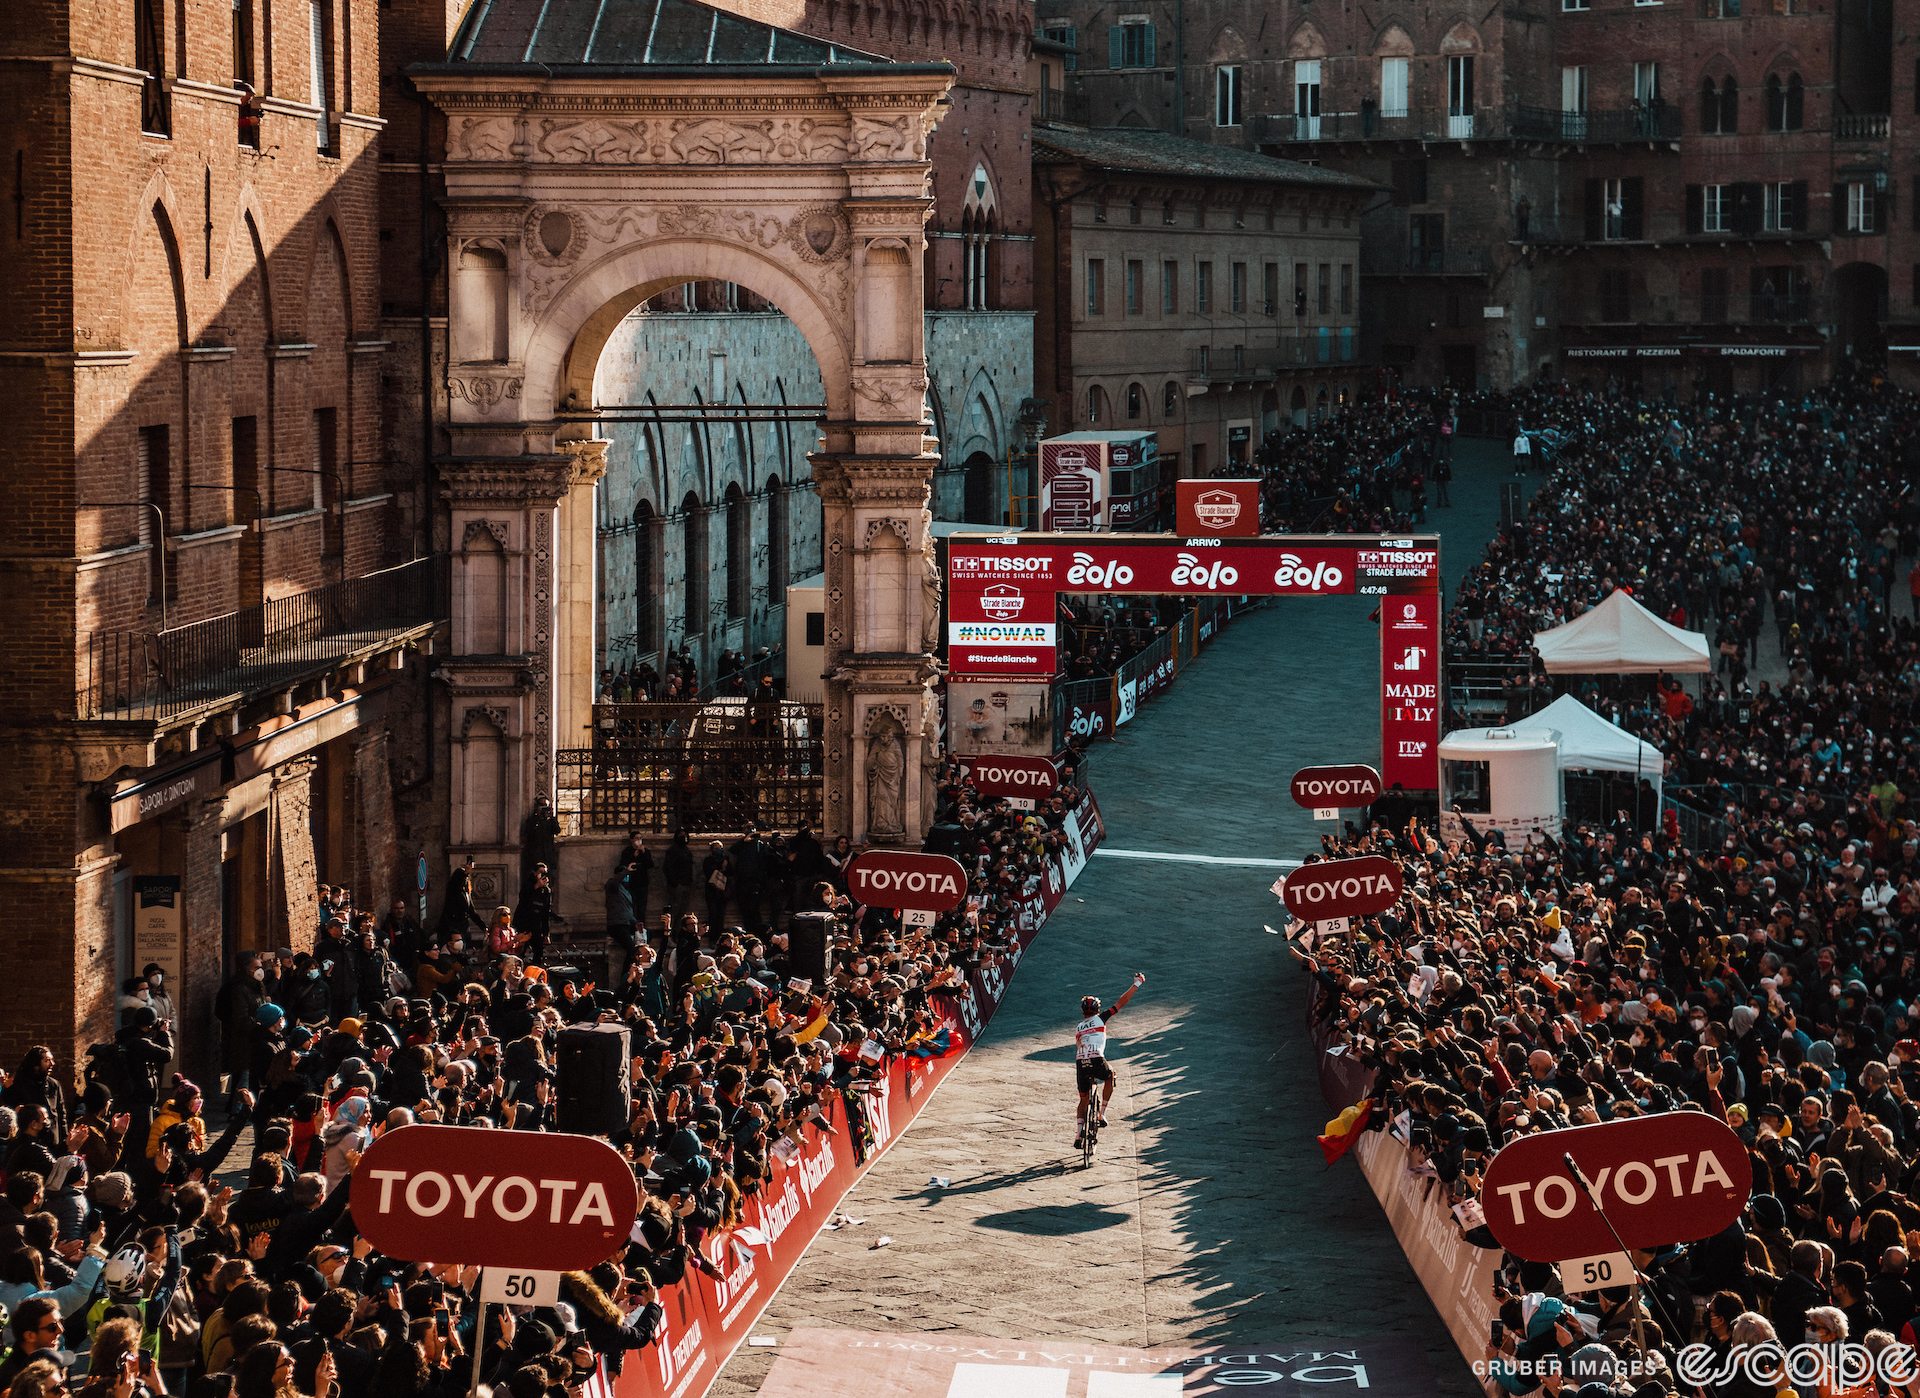 Tadej Pogačar approaches the finish line of the 2022 Strade Bianche. The wide shot takes in the mass of crowds in Siena's iconic Piazza del Campo, with red-brick medieval buildings crowded in close next to a large arch.